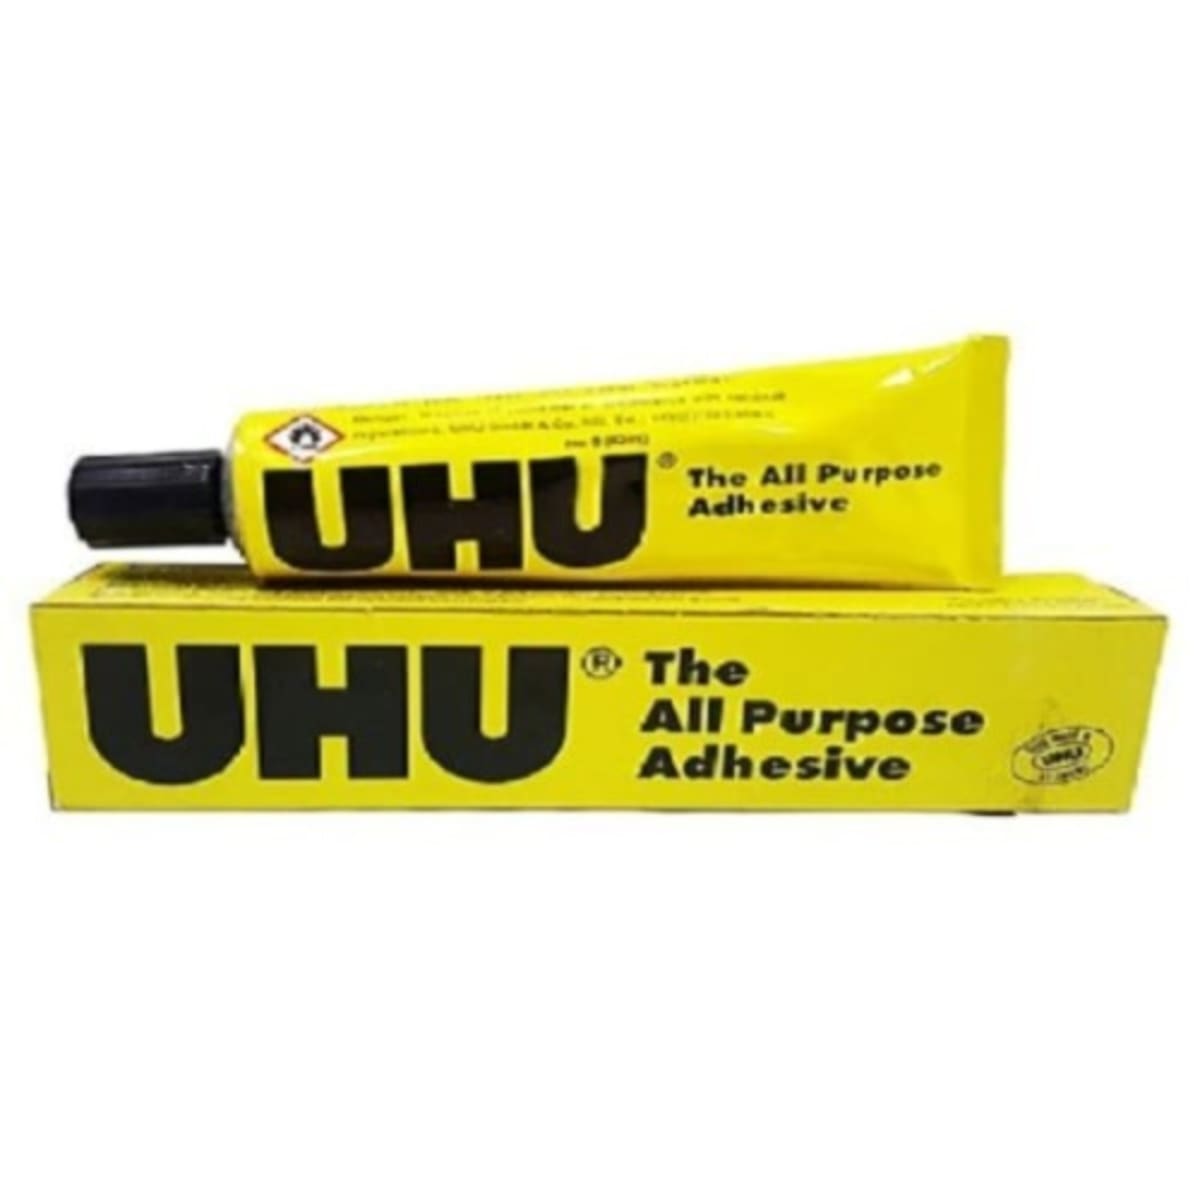 UHU All Purpose Adhesive Glue - Extra Strong Clear glue - 60ml - Pack of 12